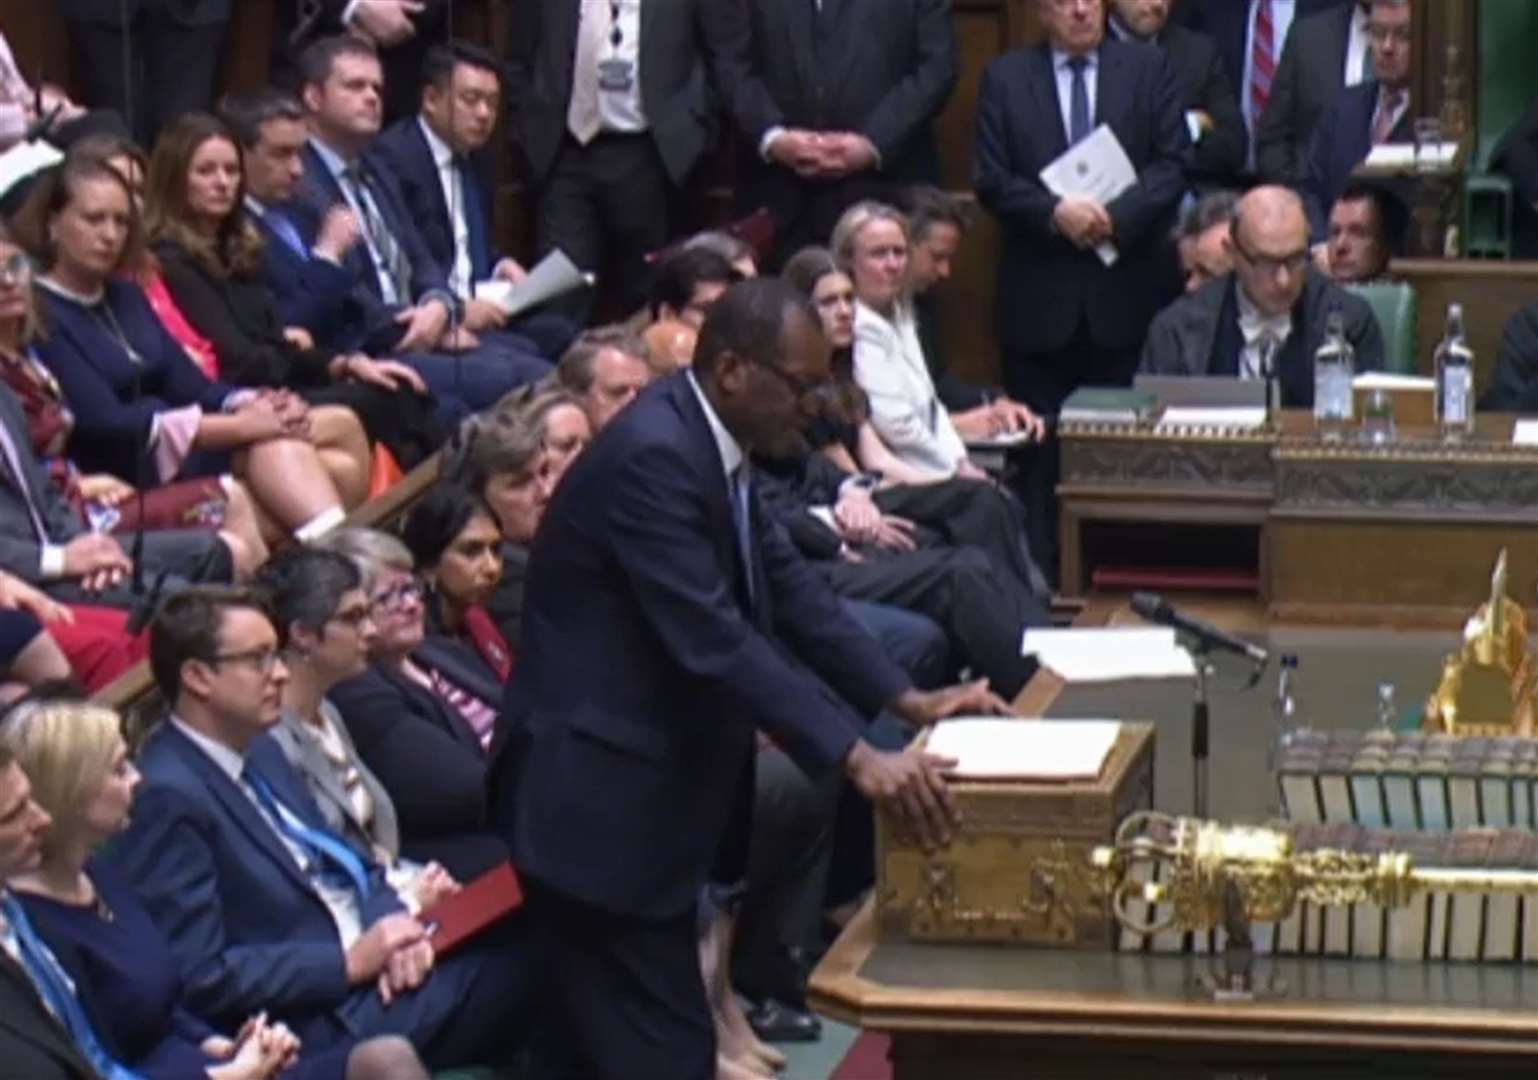 Chancellor of the Exchequer Kwasi Kwarteng delivers his mini-budget in the House of Commons (House of Commons/PA)